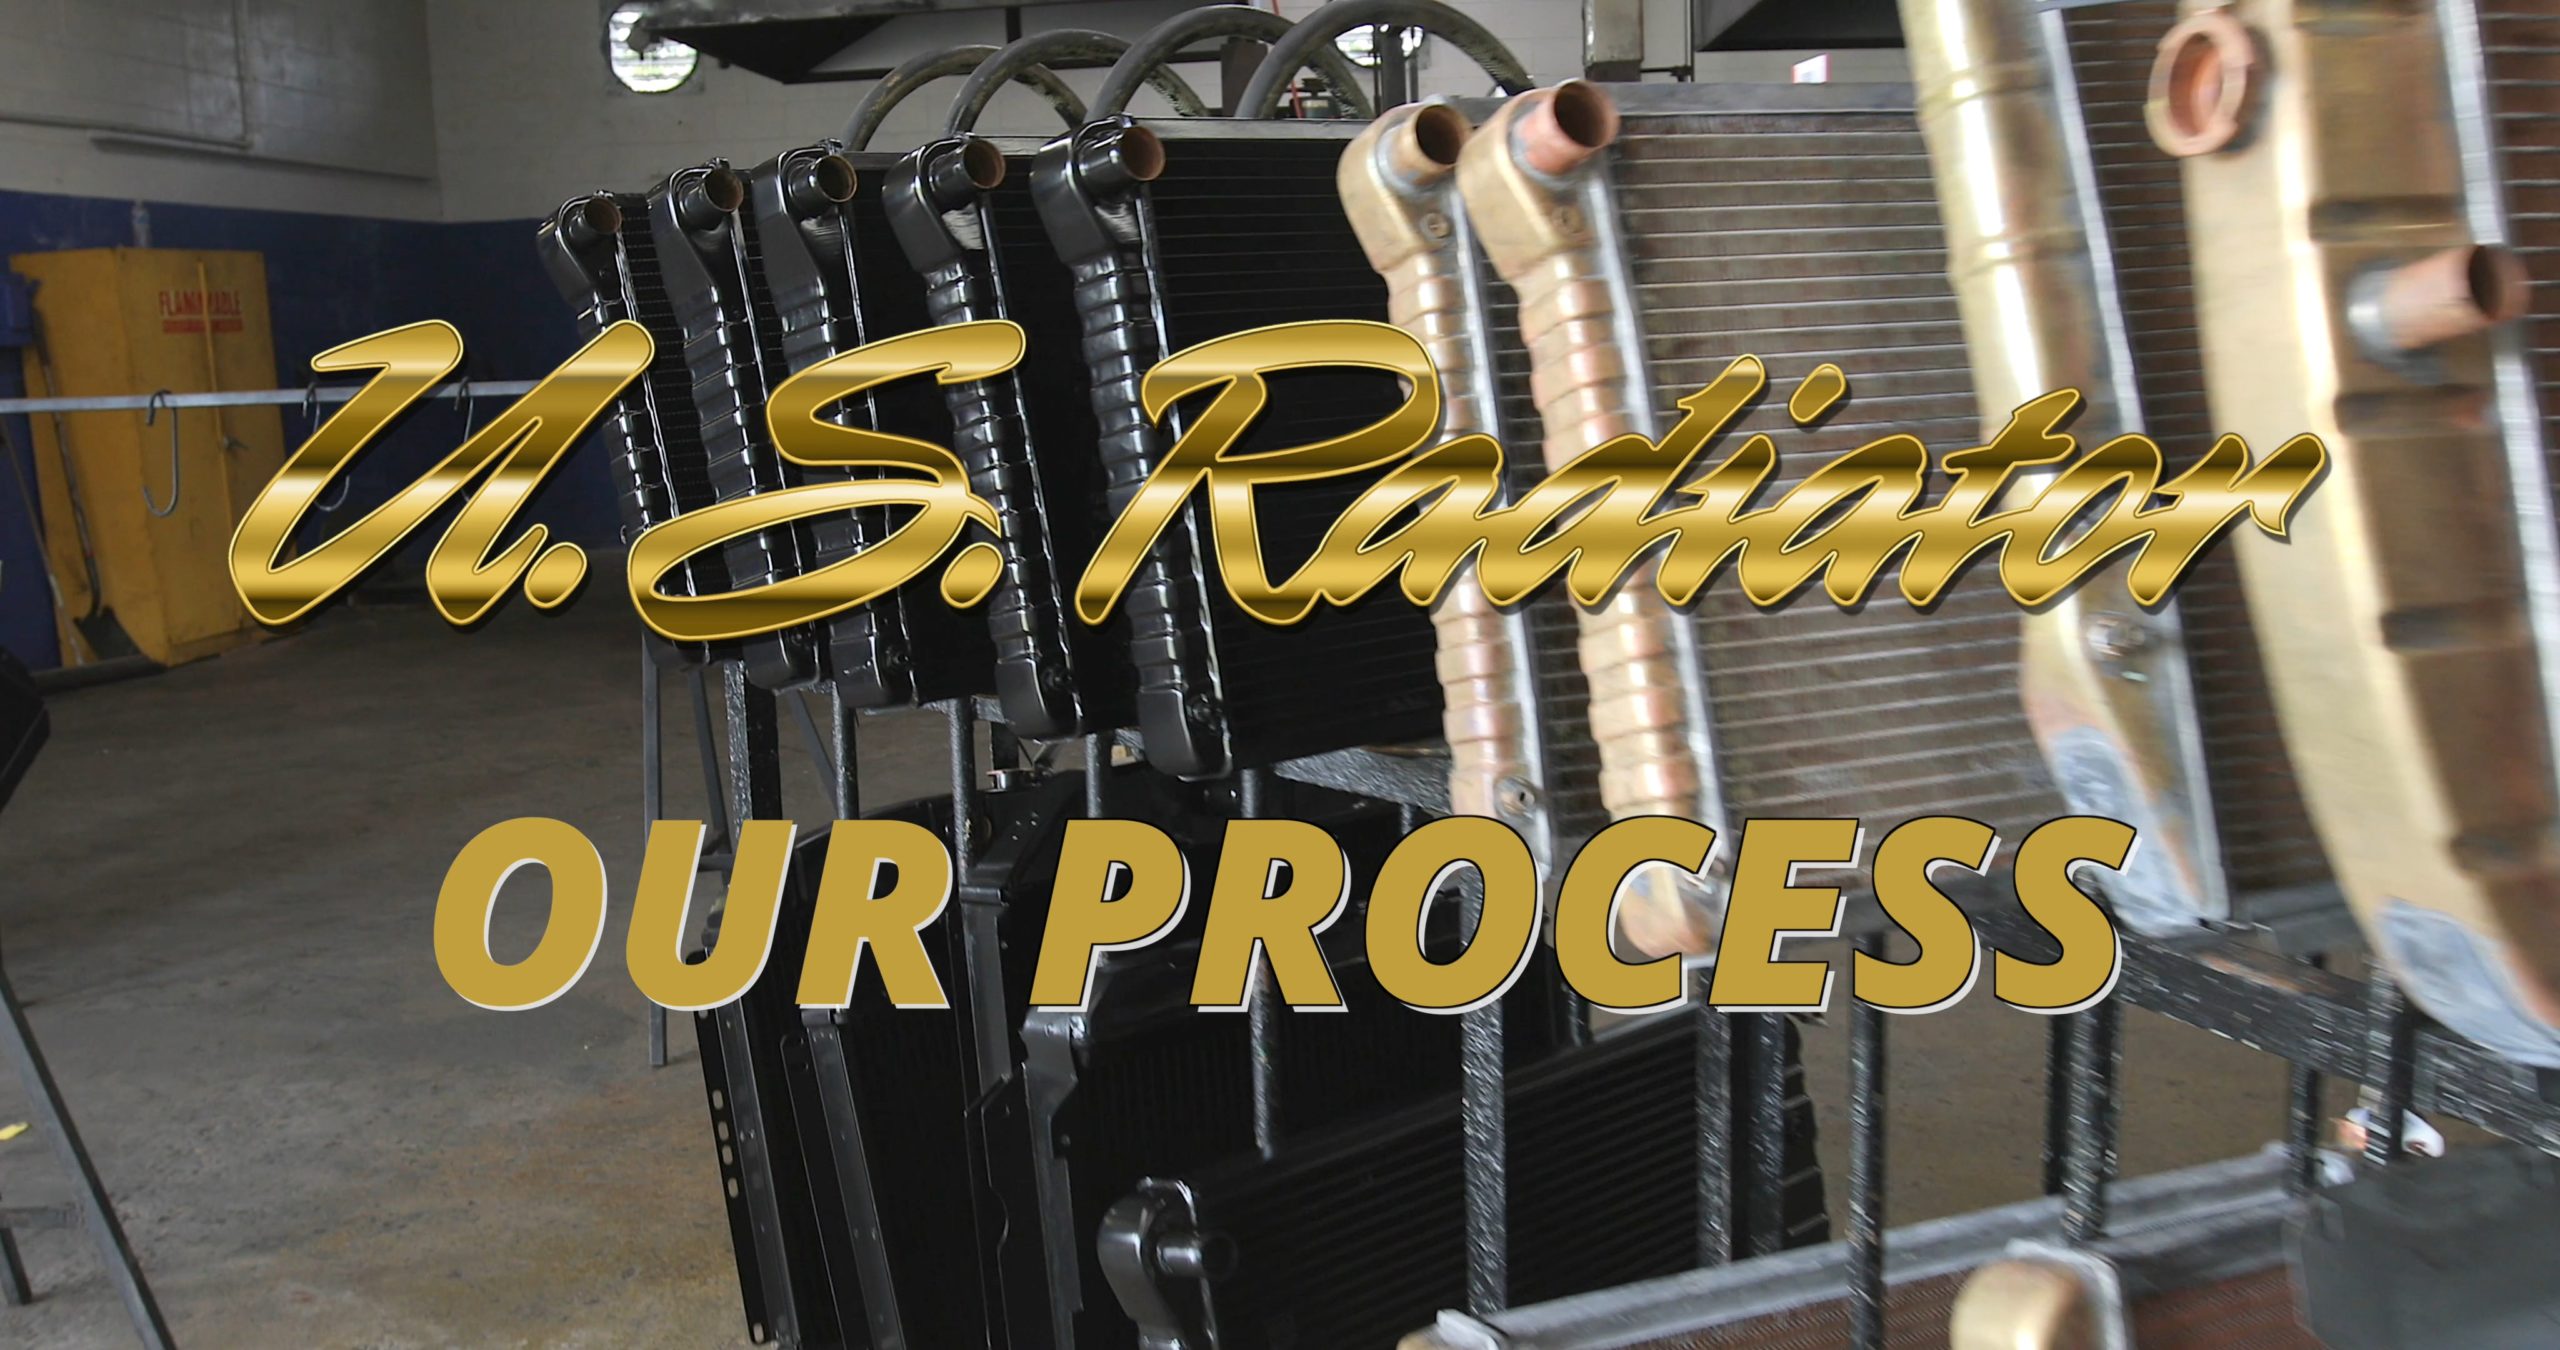 Featured image for “Our Process”